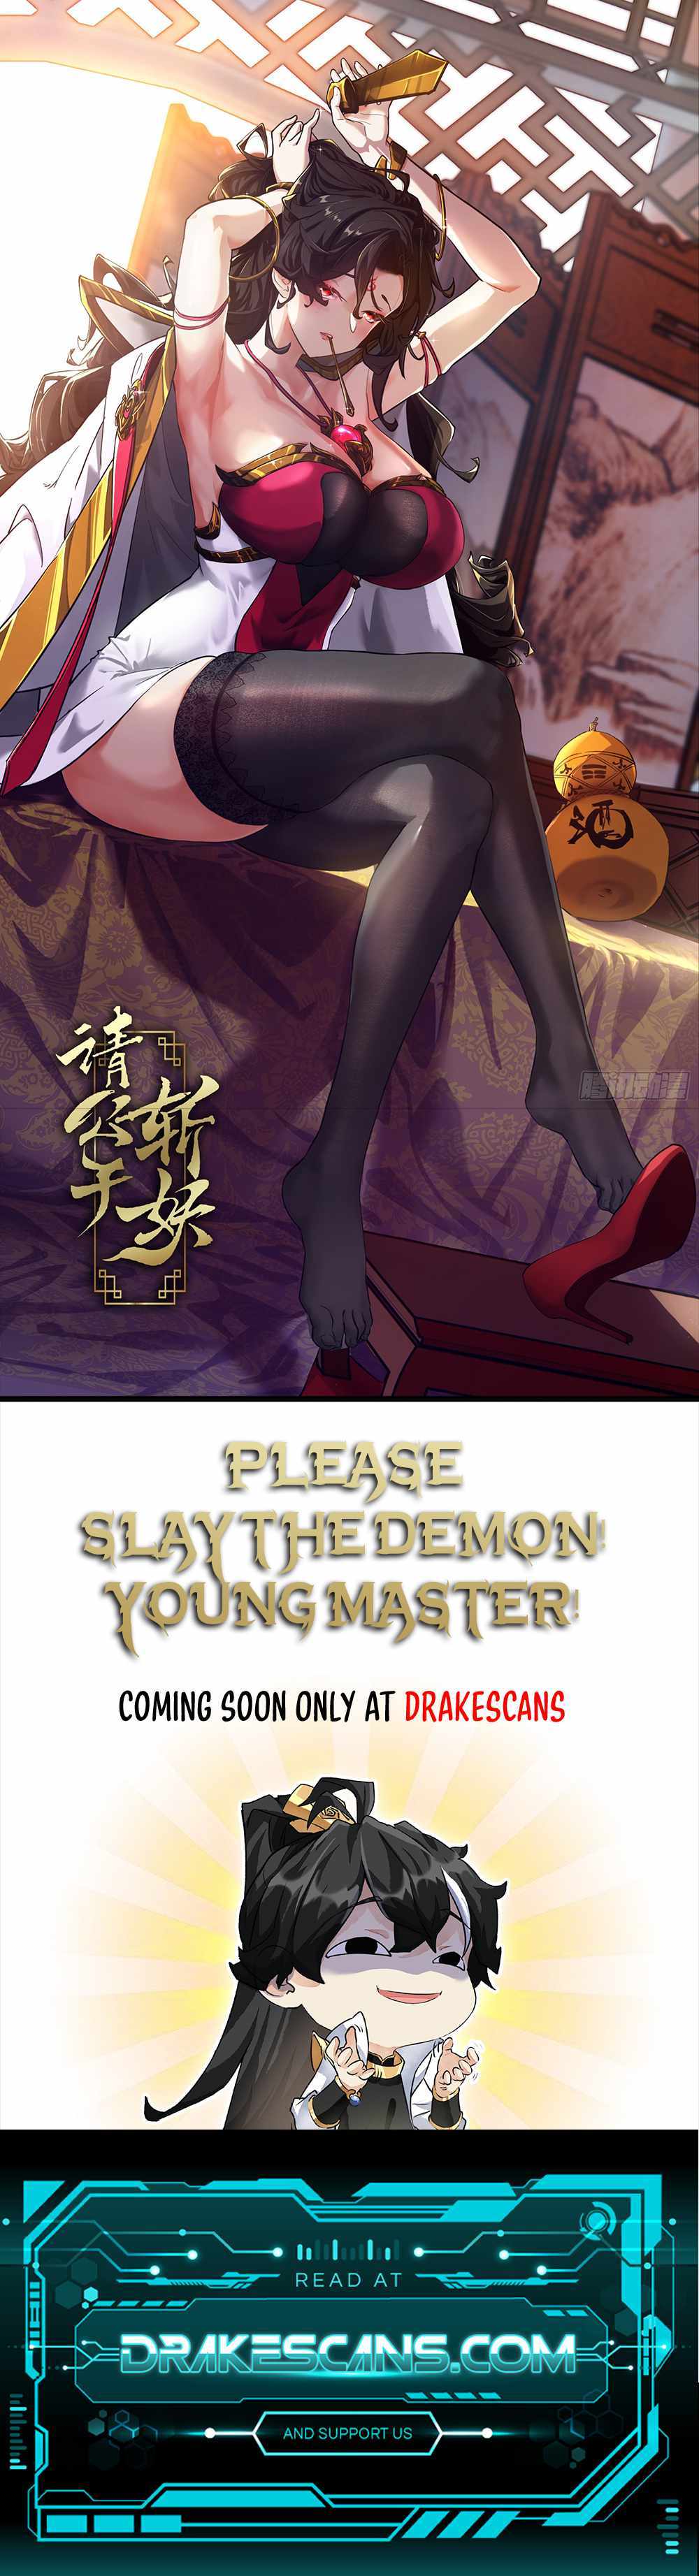 Please Slay The Demon! Young Master! - Page 2